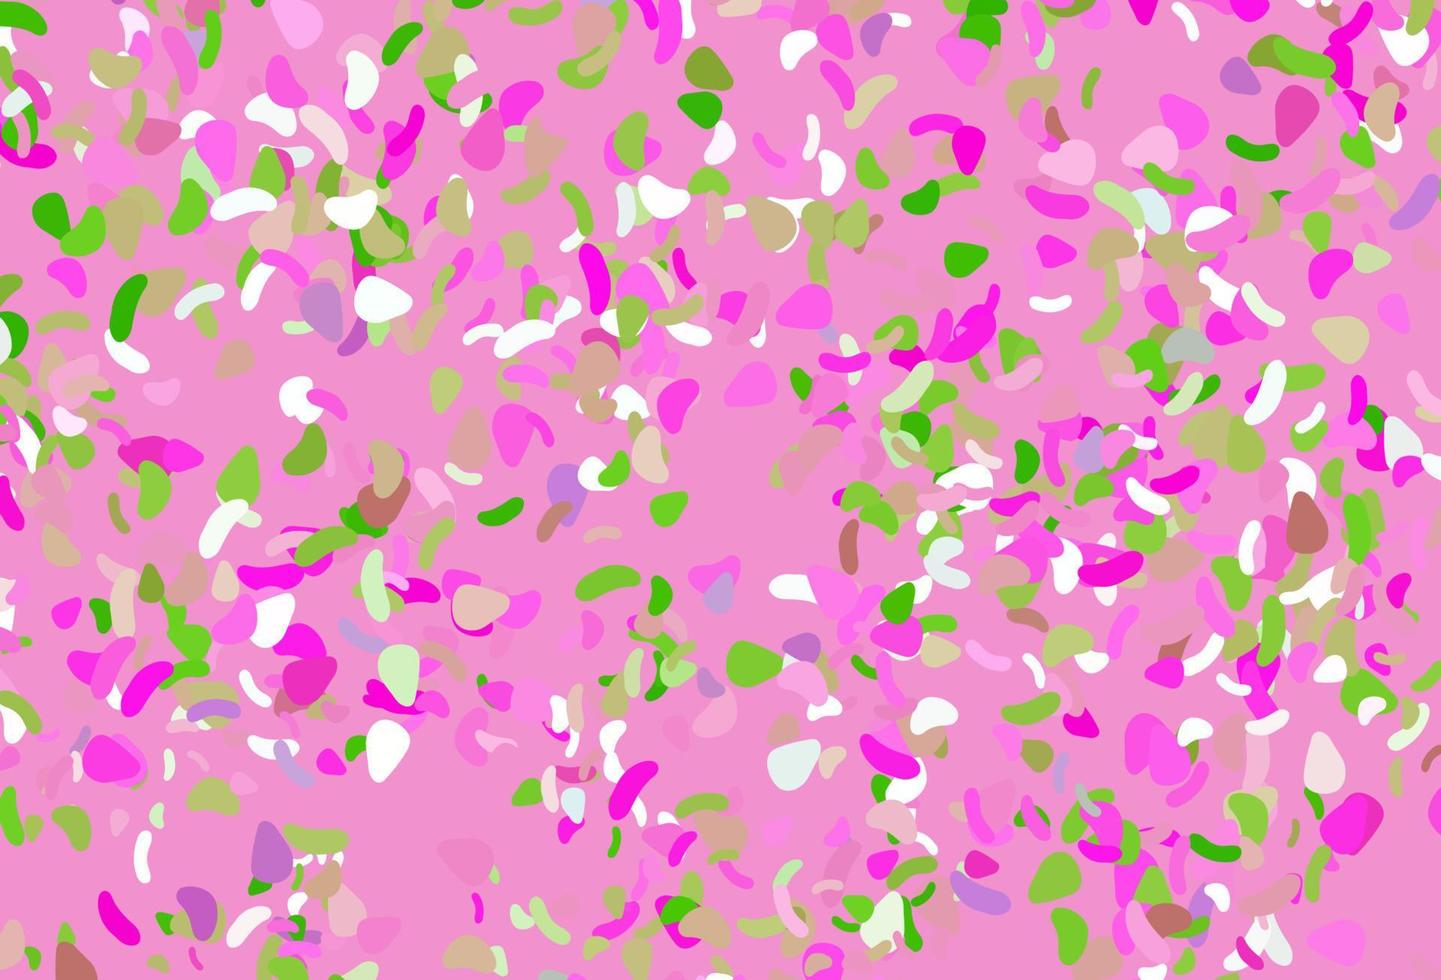 Light pink, green vector texture with random forms.